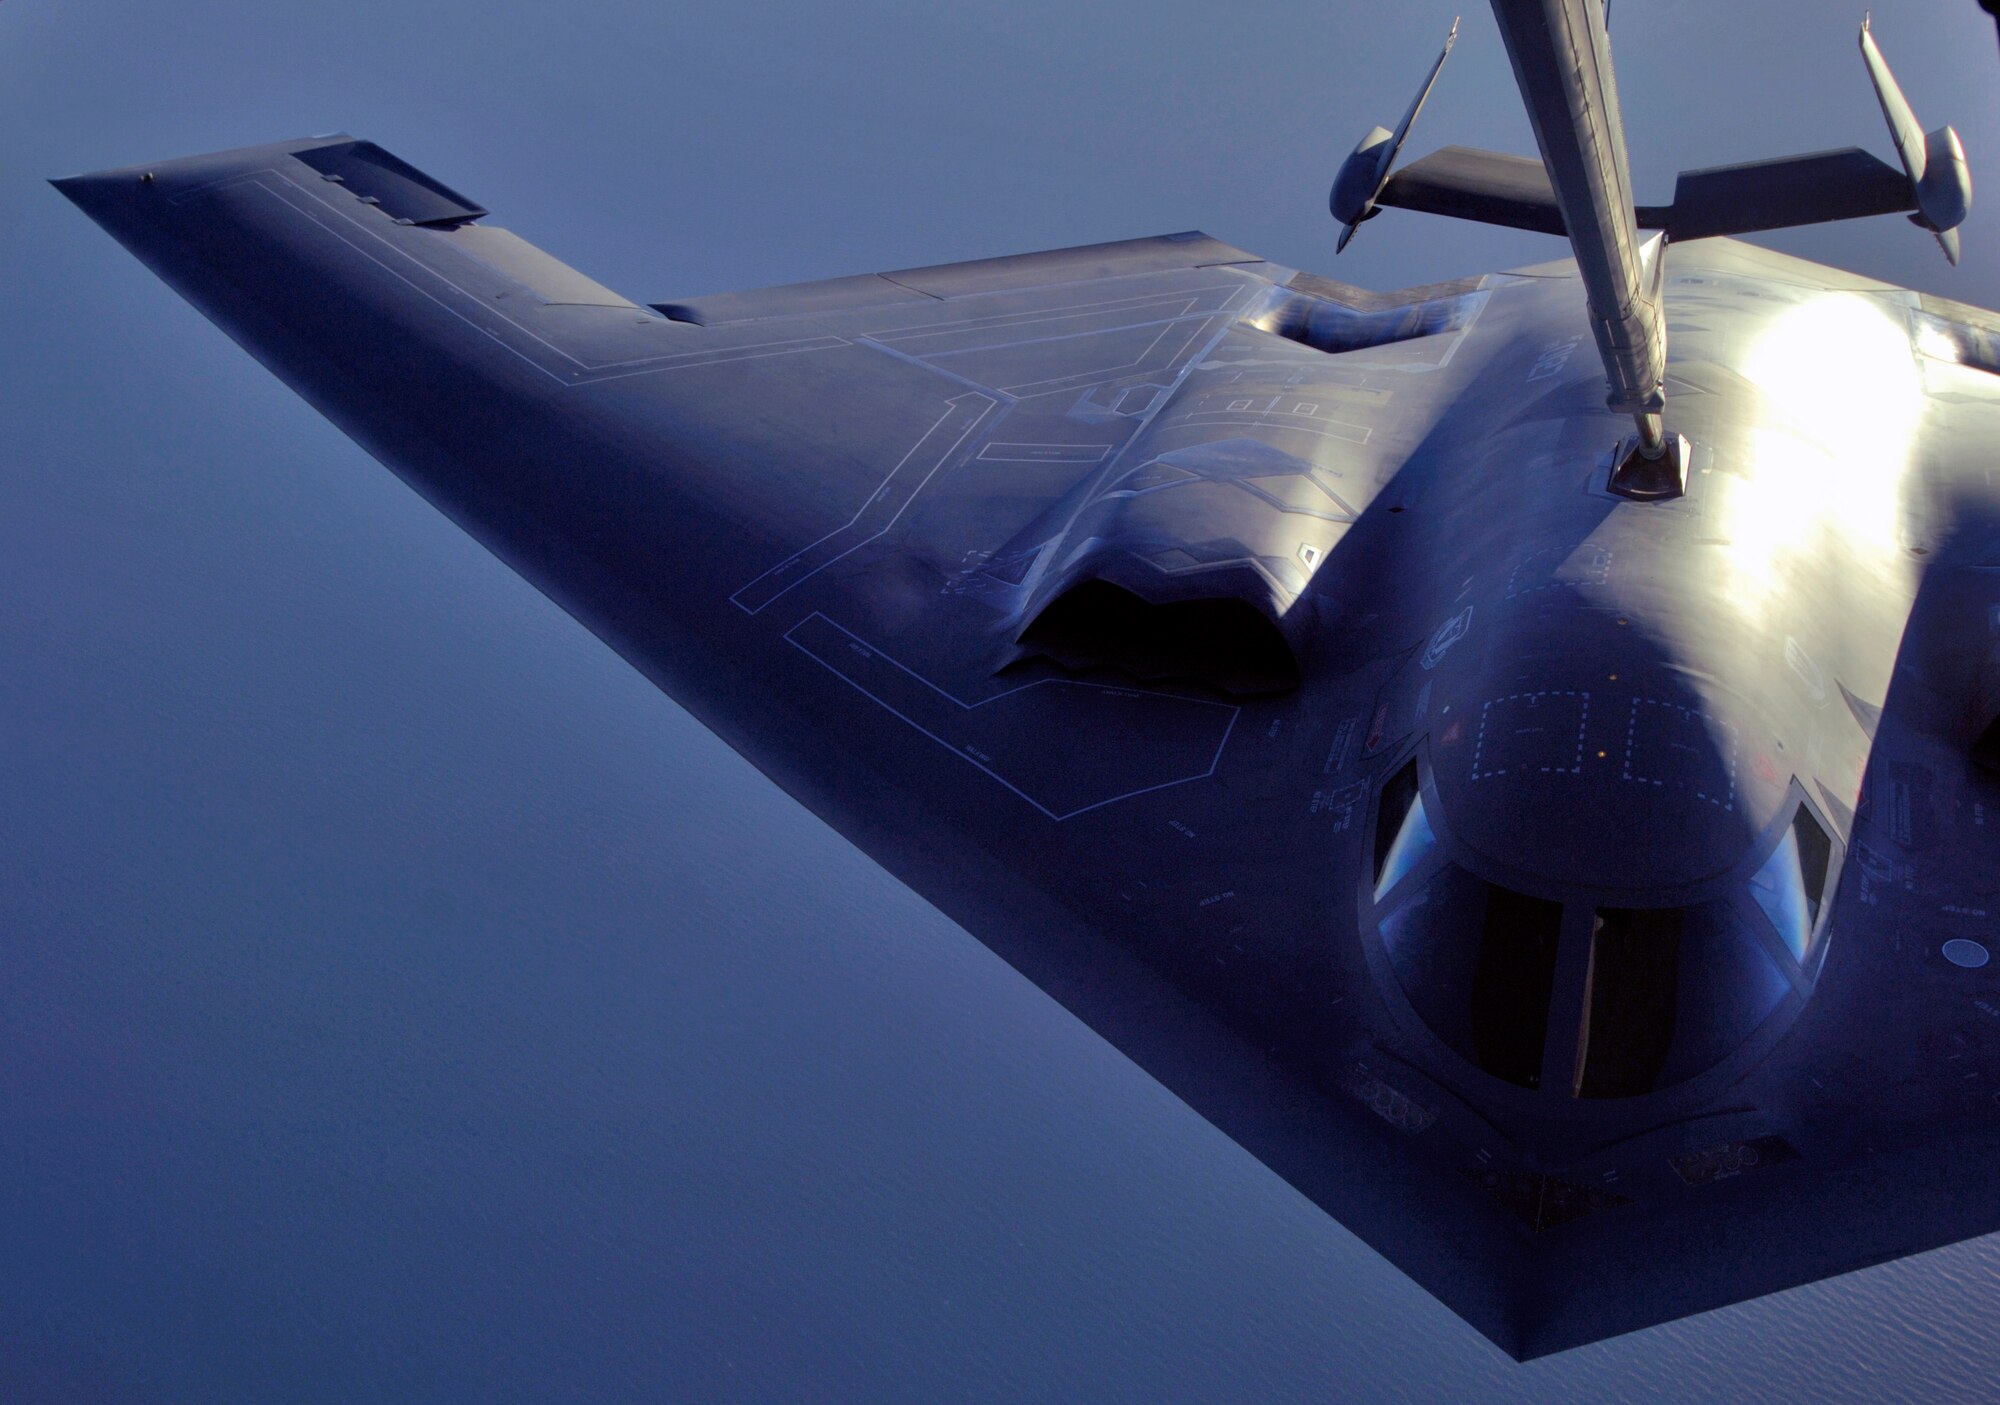 A B-2 Spirit is refueled by a KC-10 Extender over Australia during exercise Green Lightning on Tuesday, July 25. The KC-10 and B-2 are from the 36th Expeditionary Wing at Guam. The exercise will test U.S. capabilities and provide operational familiarity in the region for the Pacific bomber presence as well as serve to enhance relations with the Australians. (U.S. Air Force photo/ Tech. Sgt. Shane A. Cuomo) 